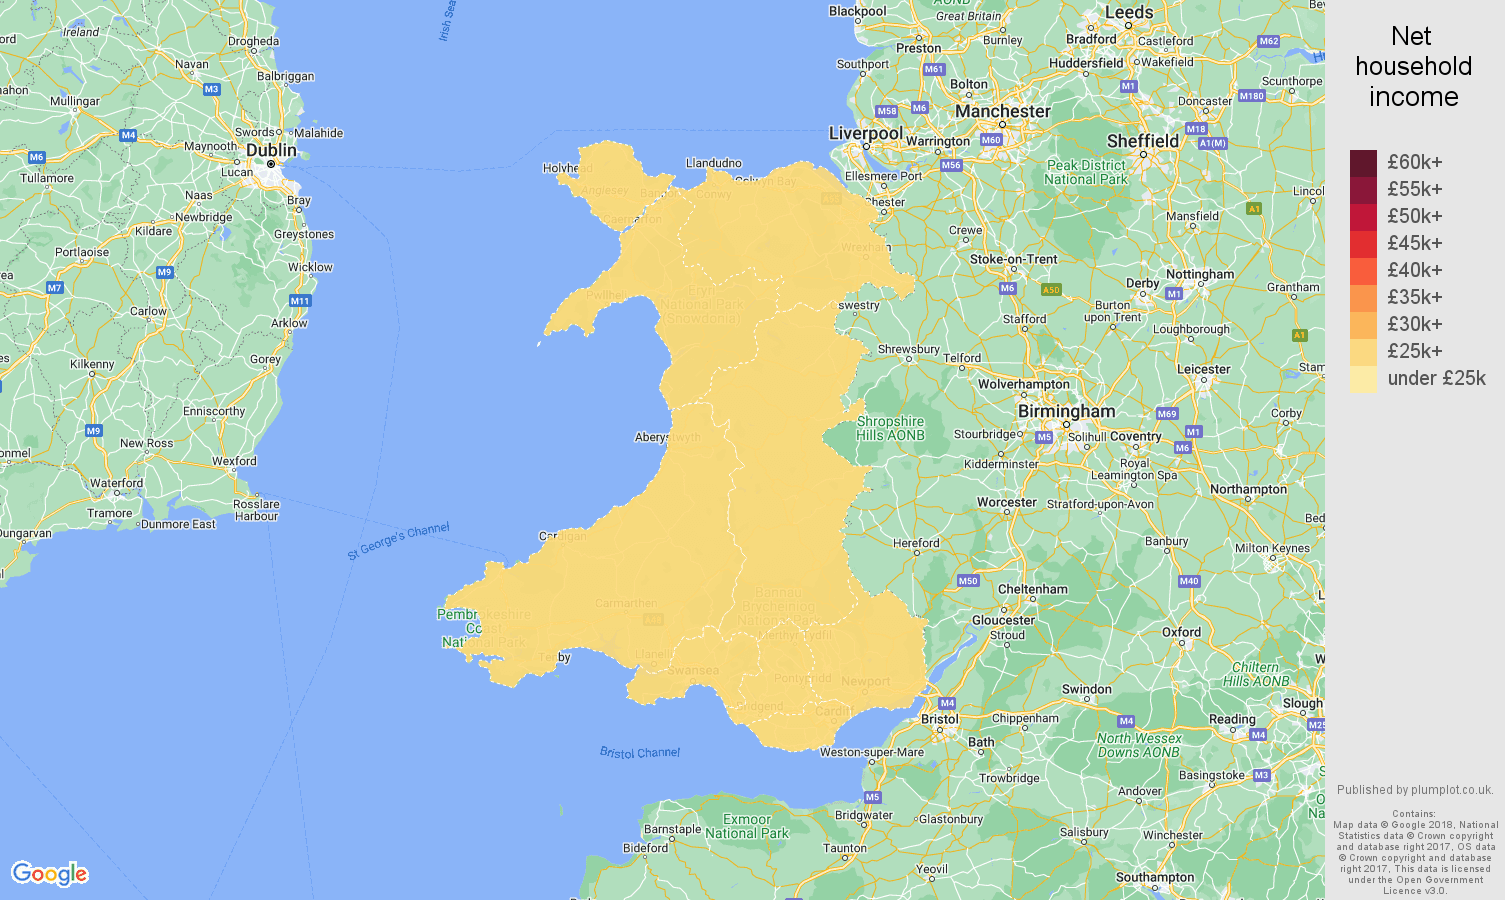 Wales net household income map